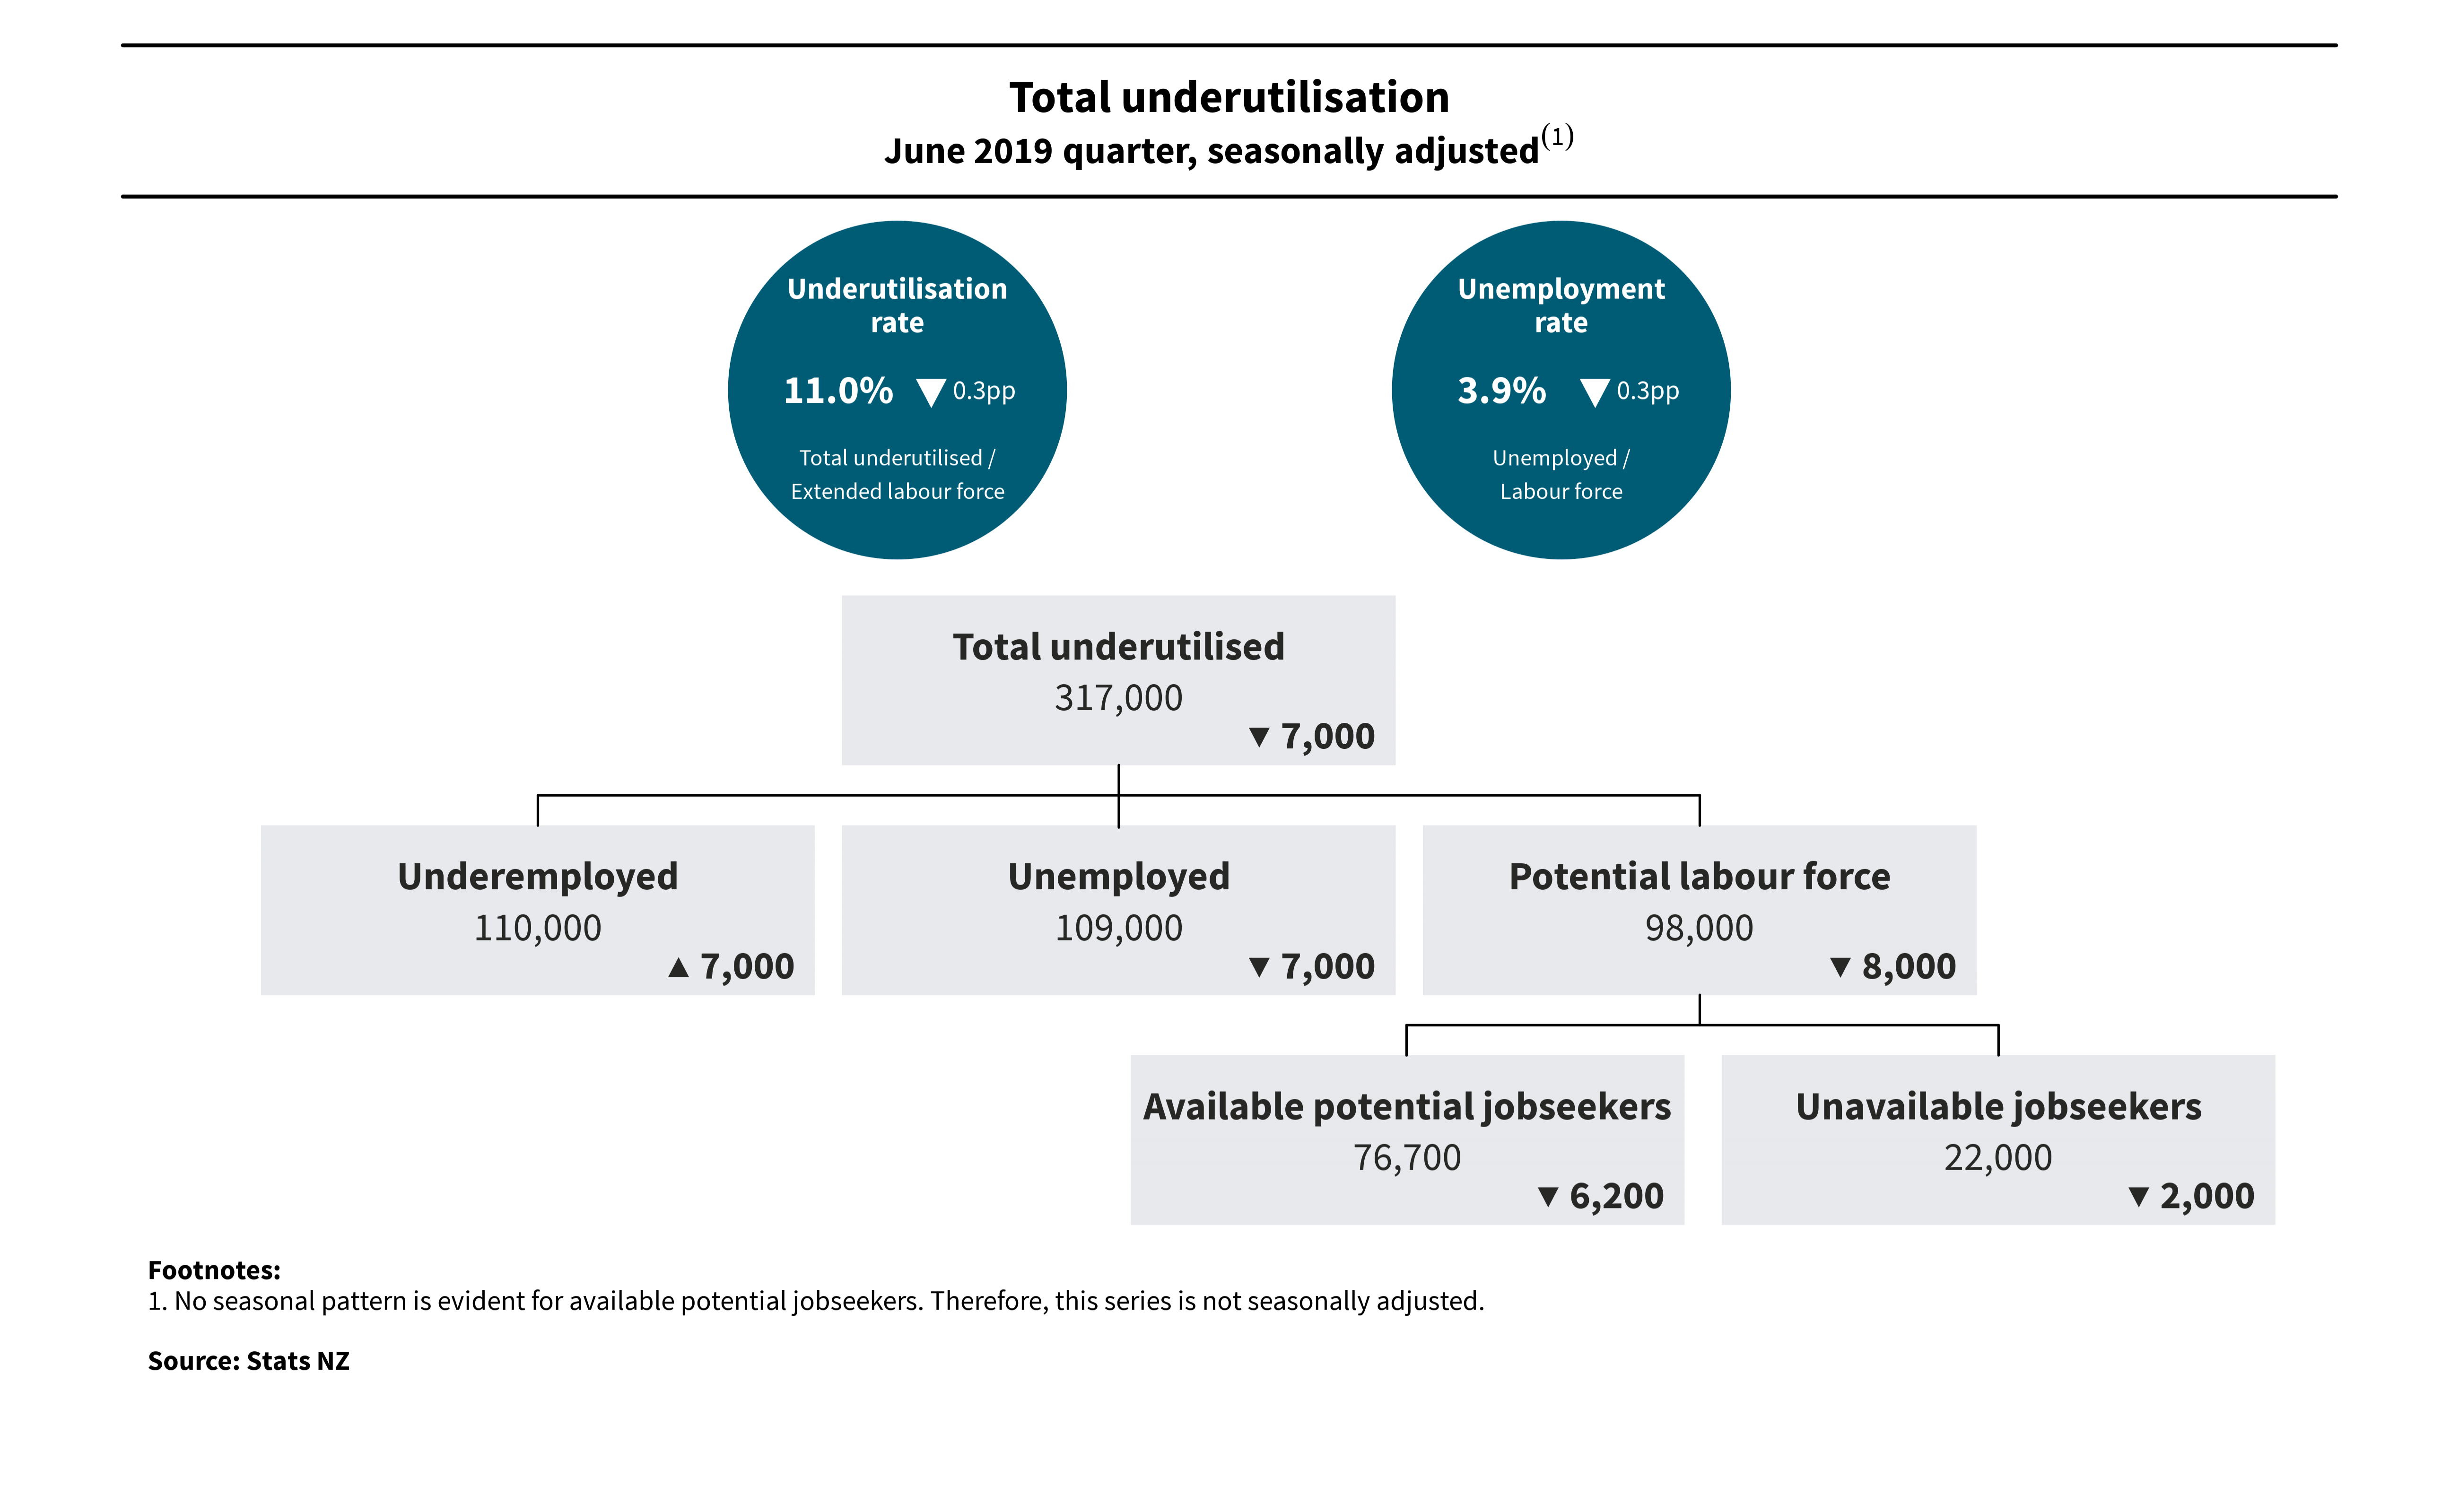 Diagram shows total underutilisation - full text alternative available below